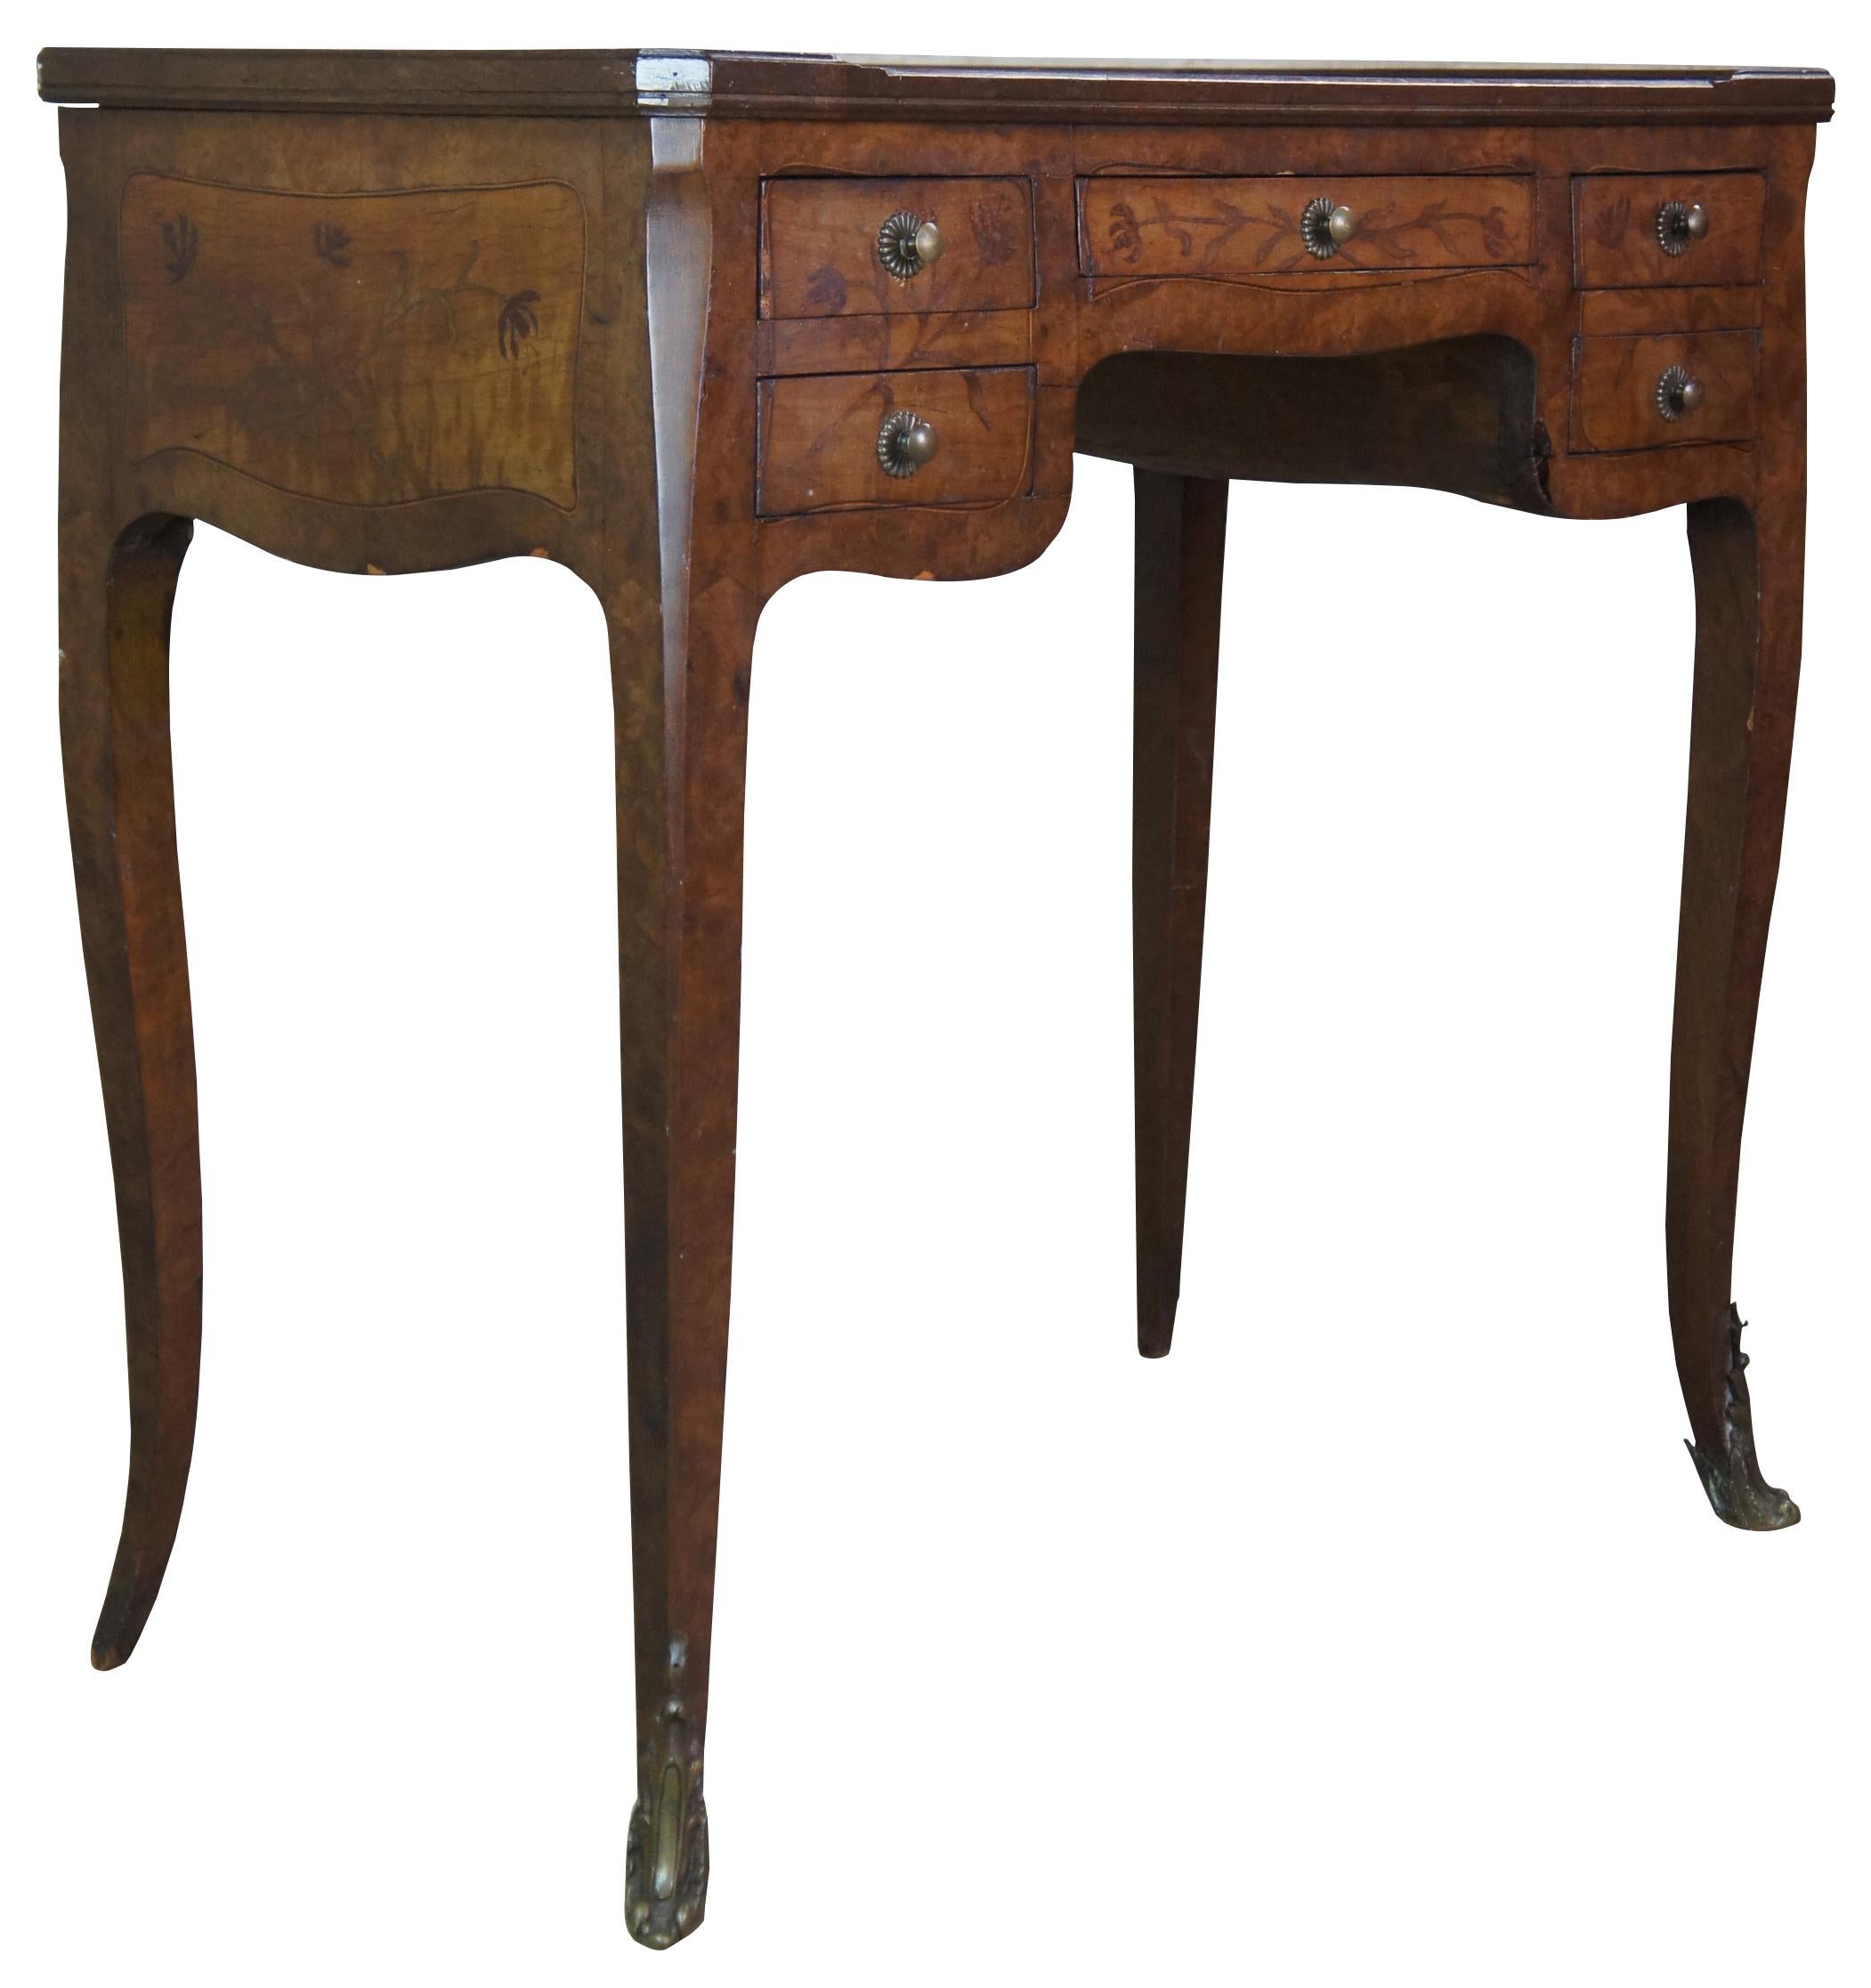 Antique Louis XV / Quinze style petitle ladies writing table, desk or bureau . Made of burl walnut with rectangular form featuring marquetry inlaid floral accents, leather top with gallery, tapered cabriole legs with ormalu feet and finished false